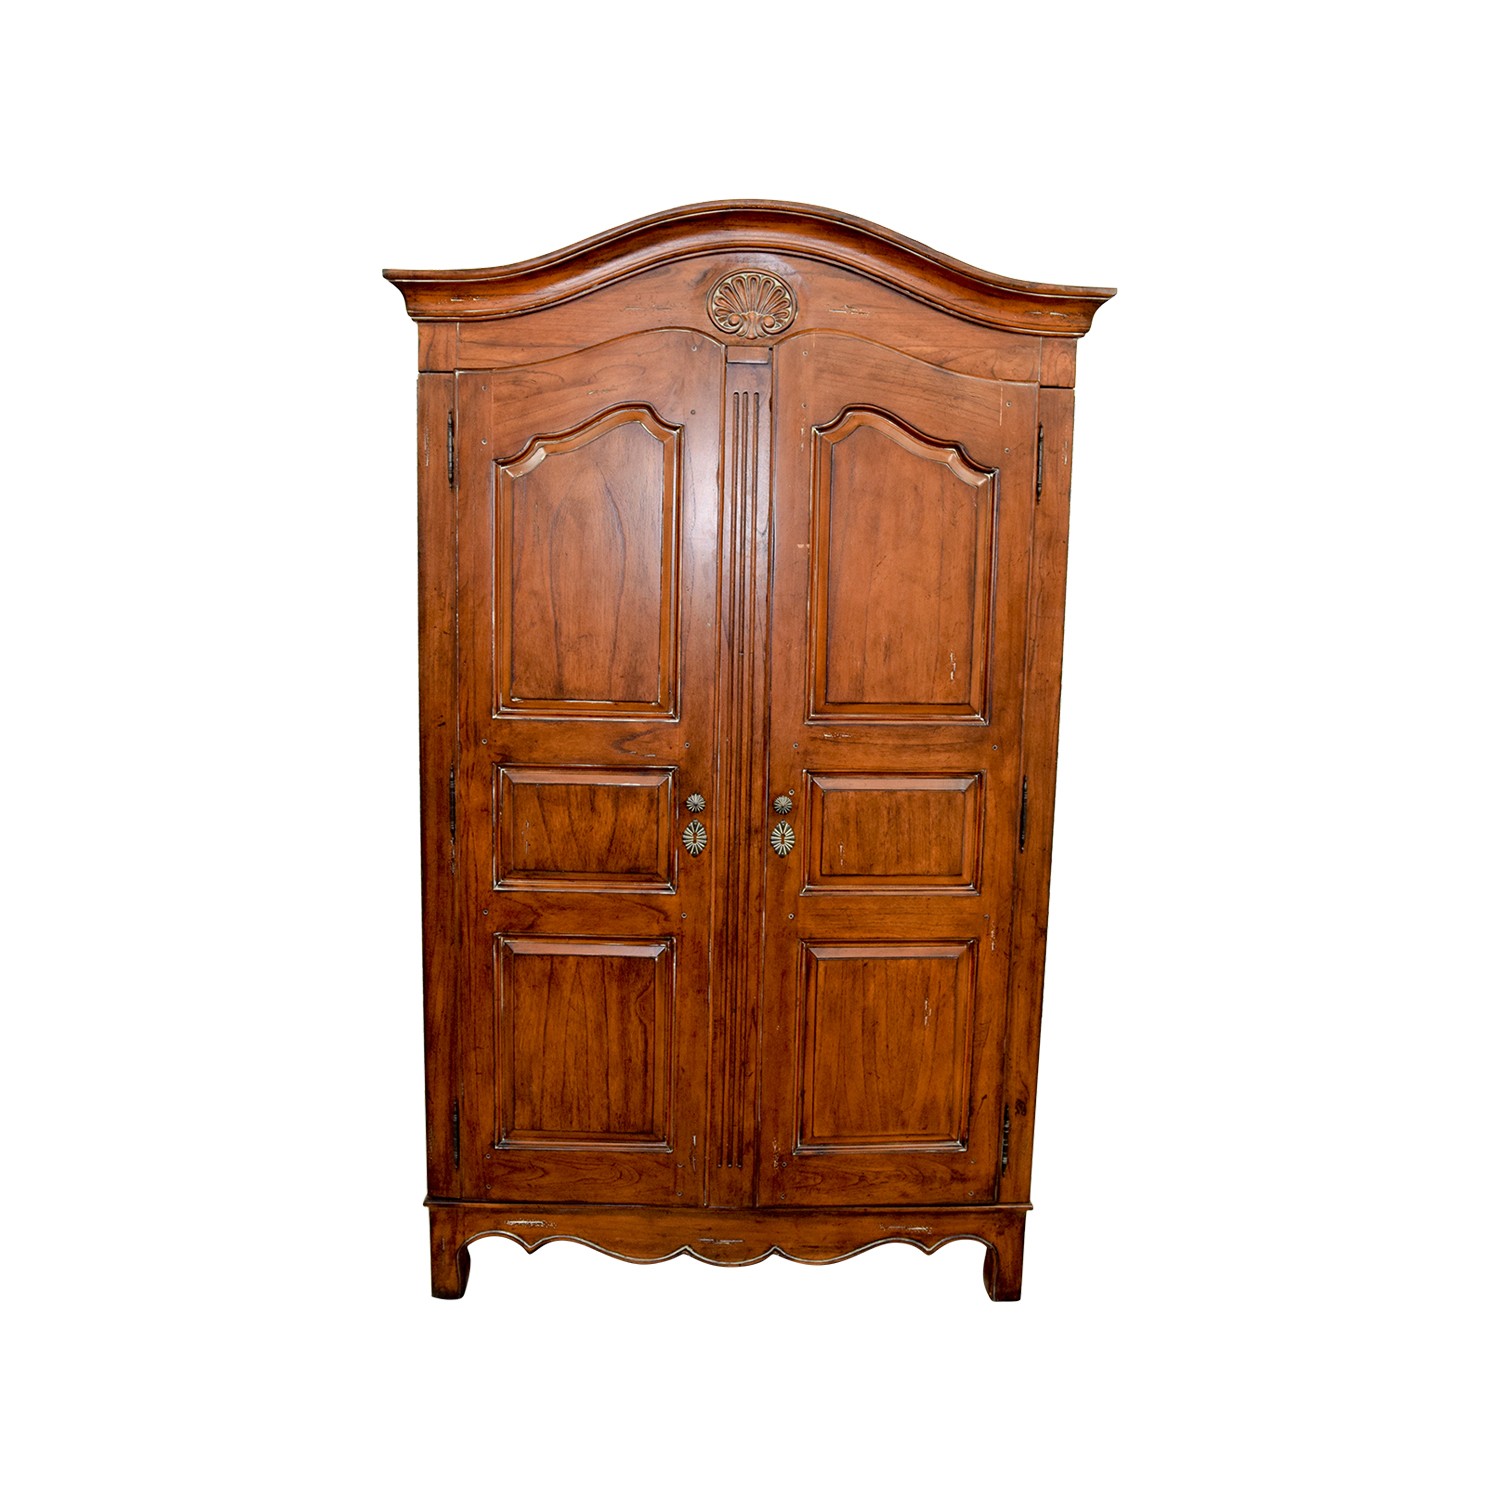 64 off wood armoire with interior shelves storage